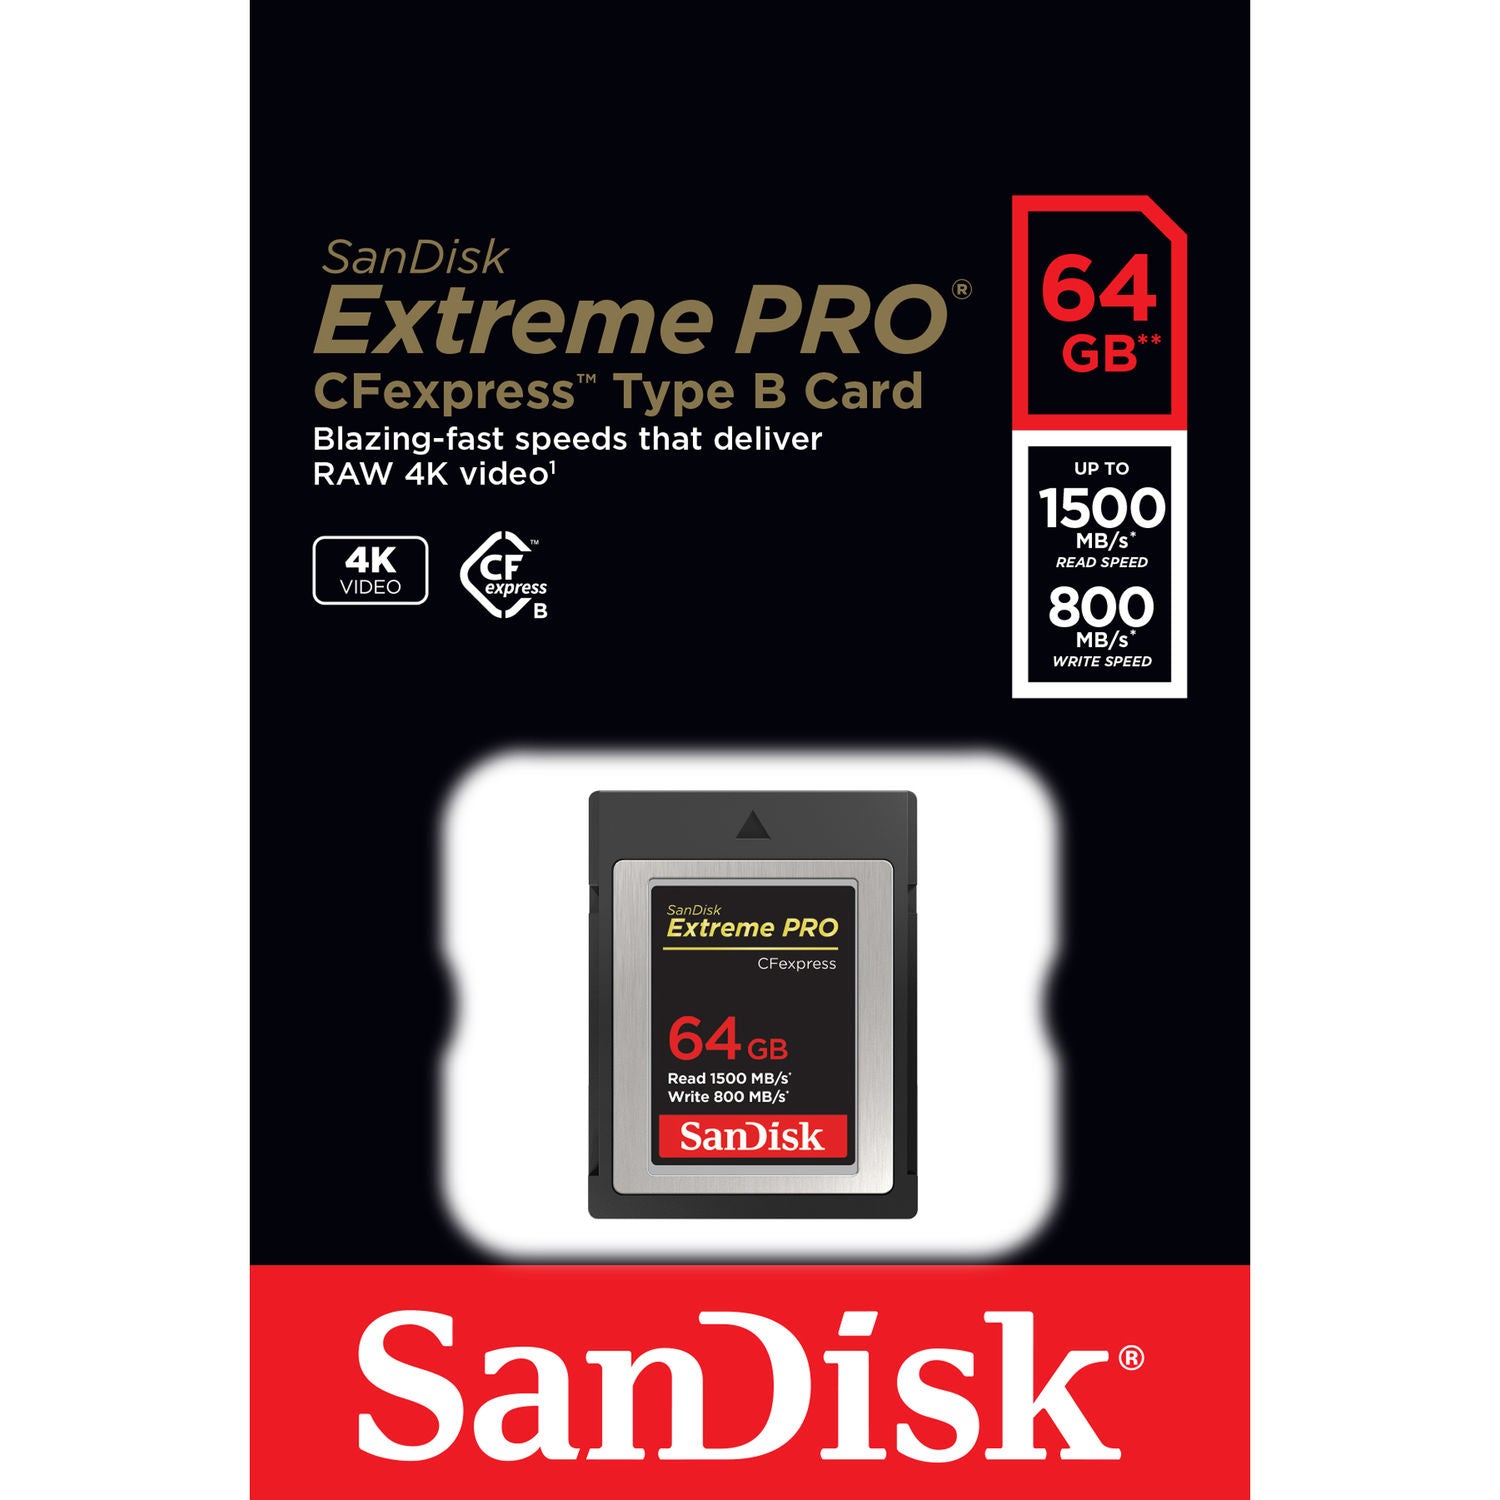 Product Image of SanDisk Extreme PRO 64GB CF Express Card Type B, up to 1500MB/s, for RAW 4K video